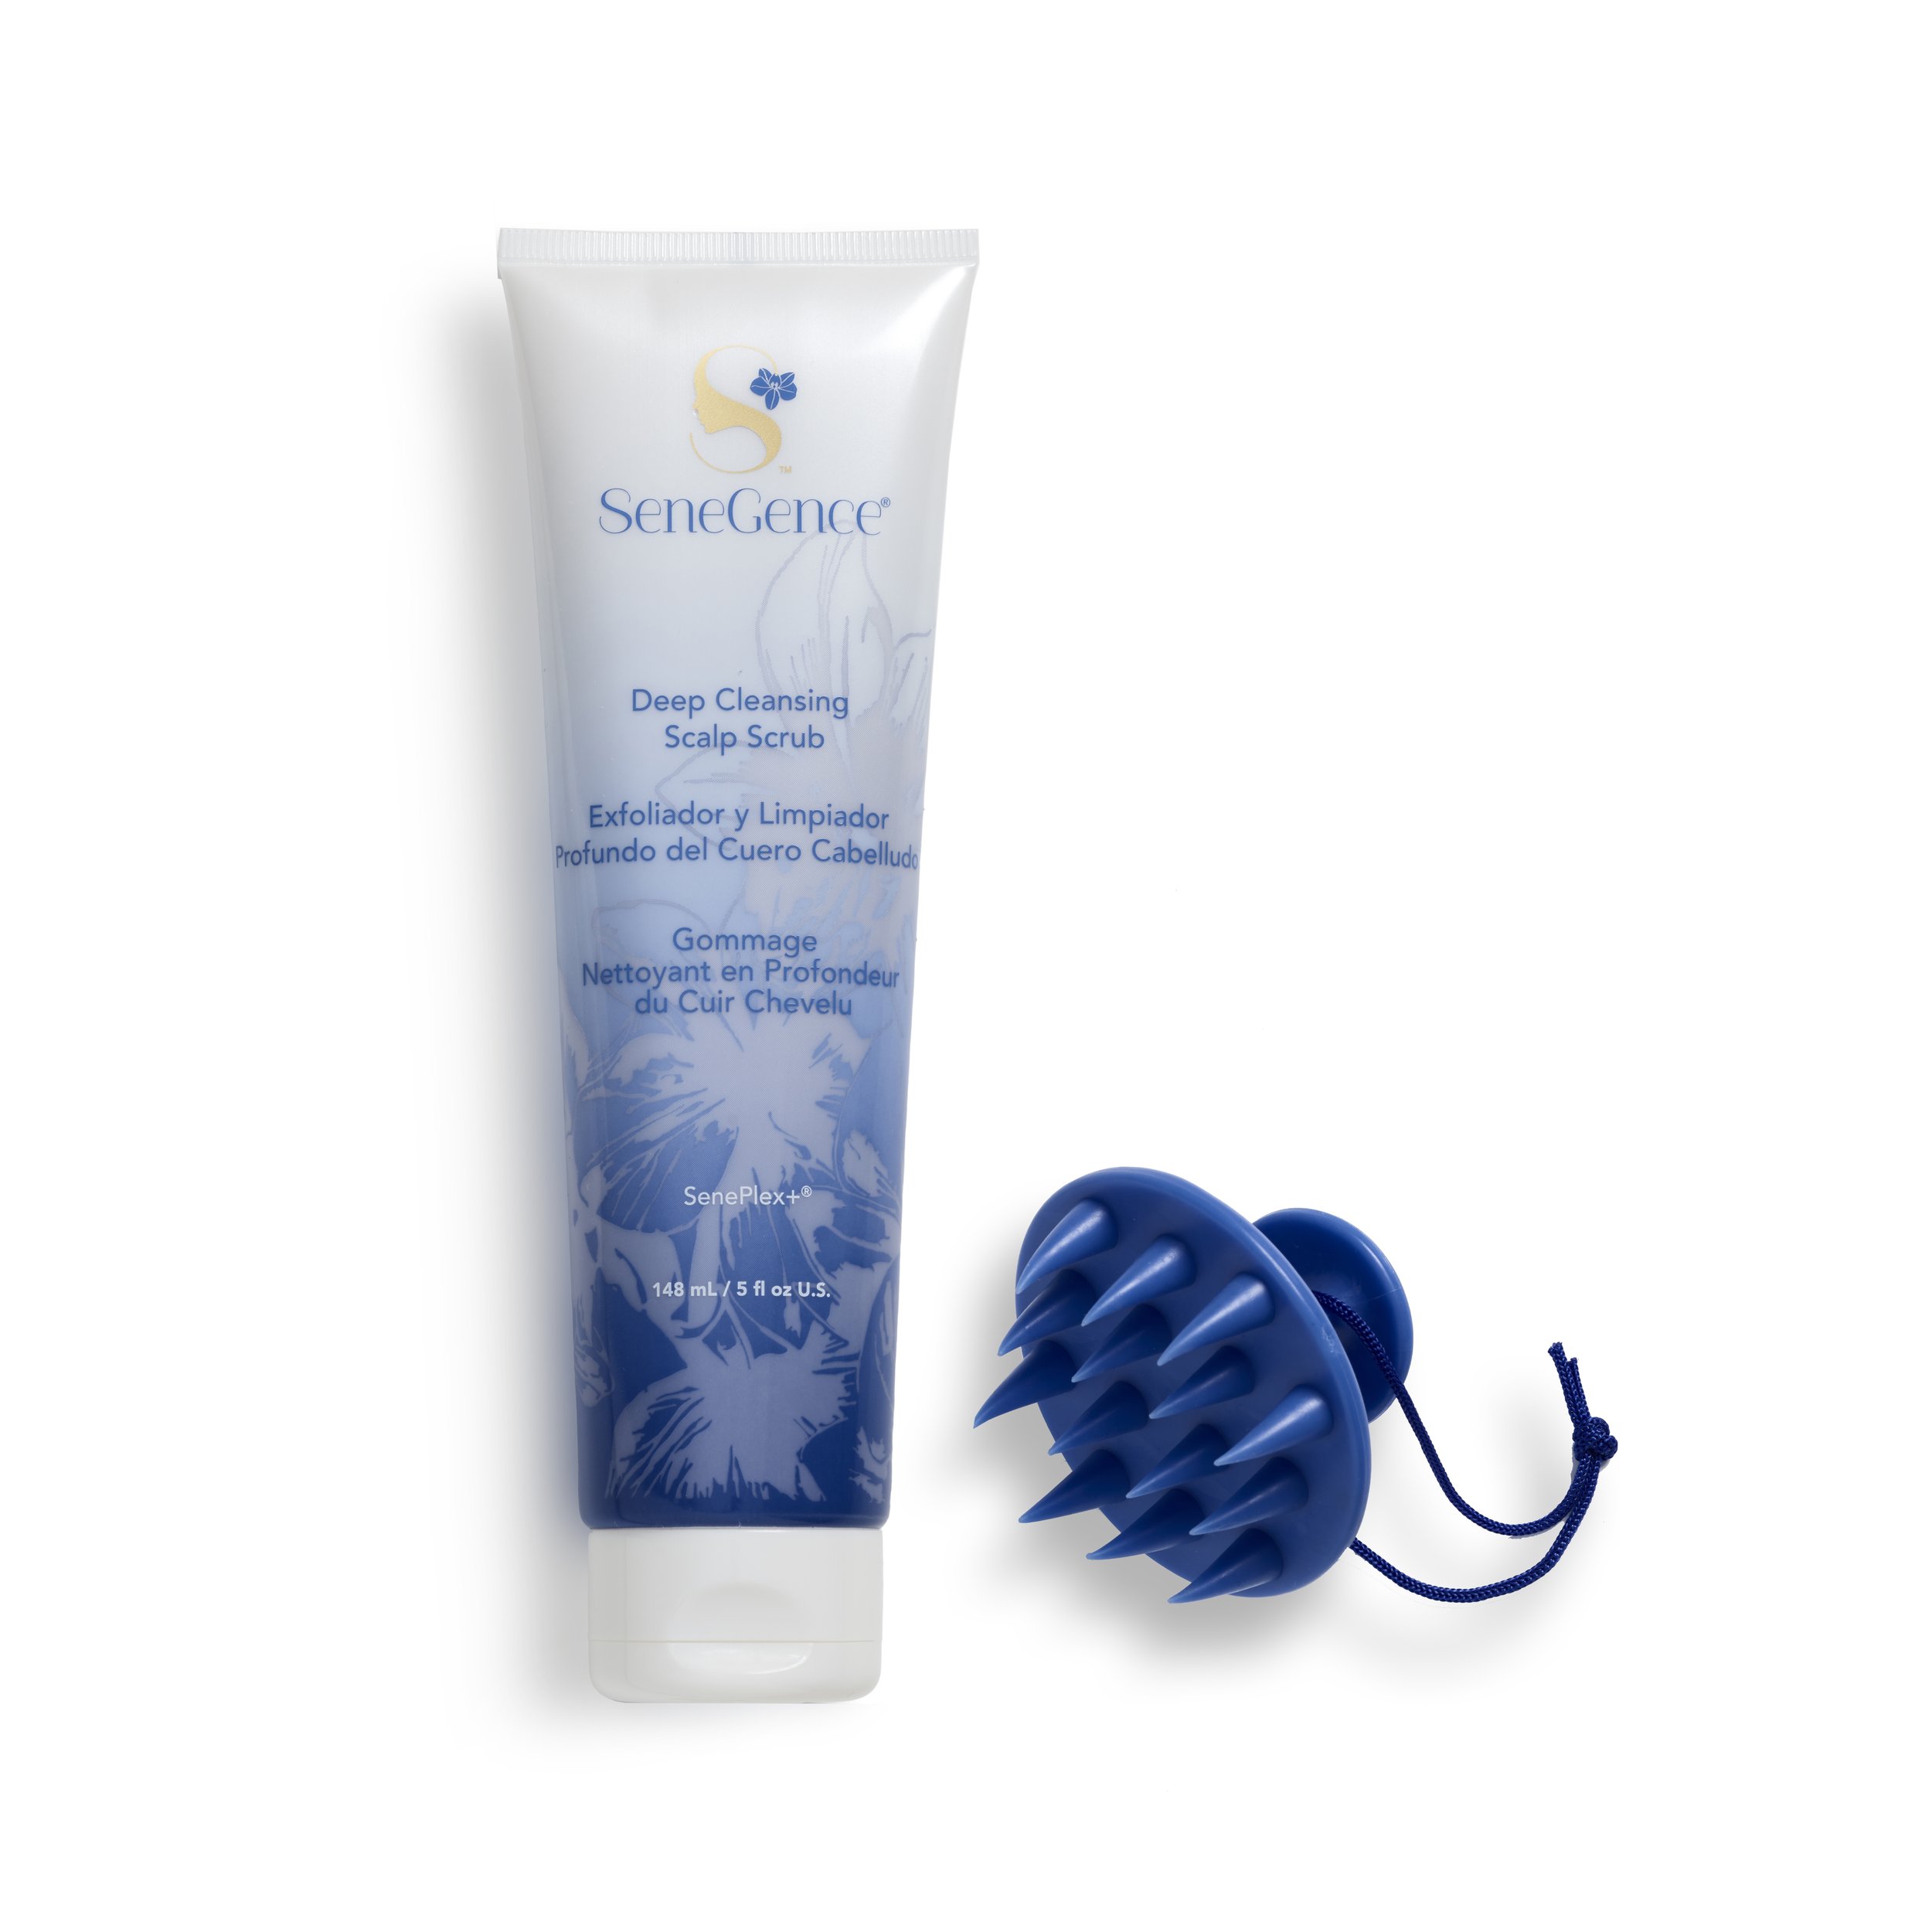 Deep Cleansing Scalp Scrub with Scrubber